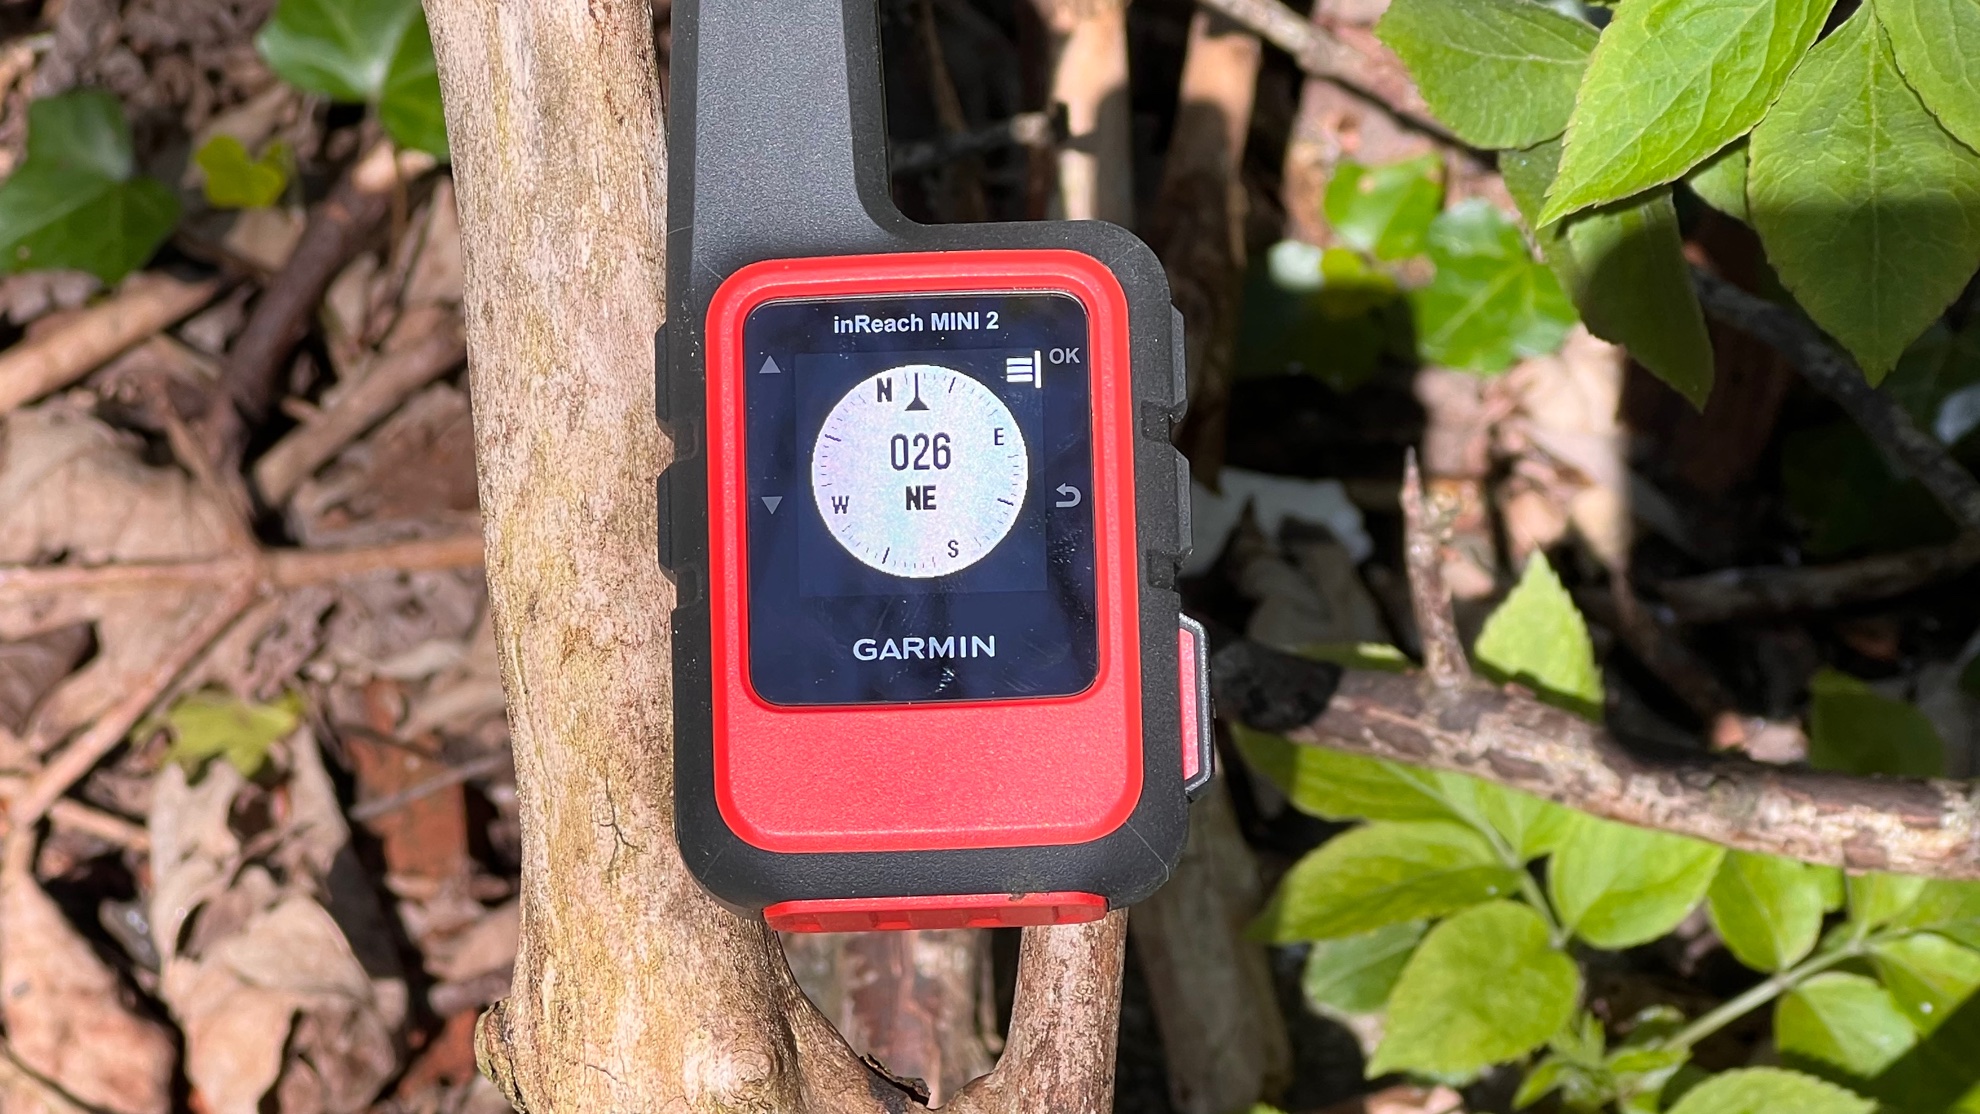 Garmin inReach Mini 2 hiking GPS review: connected when off-grid | T3